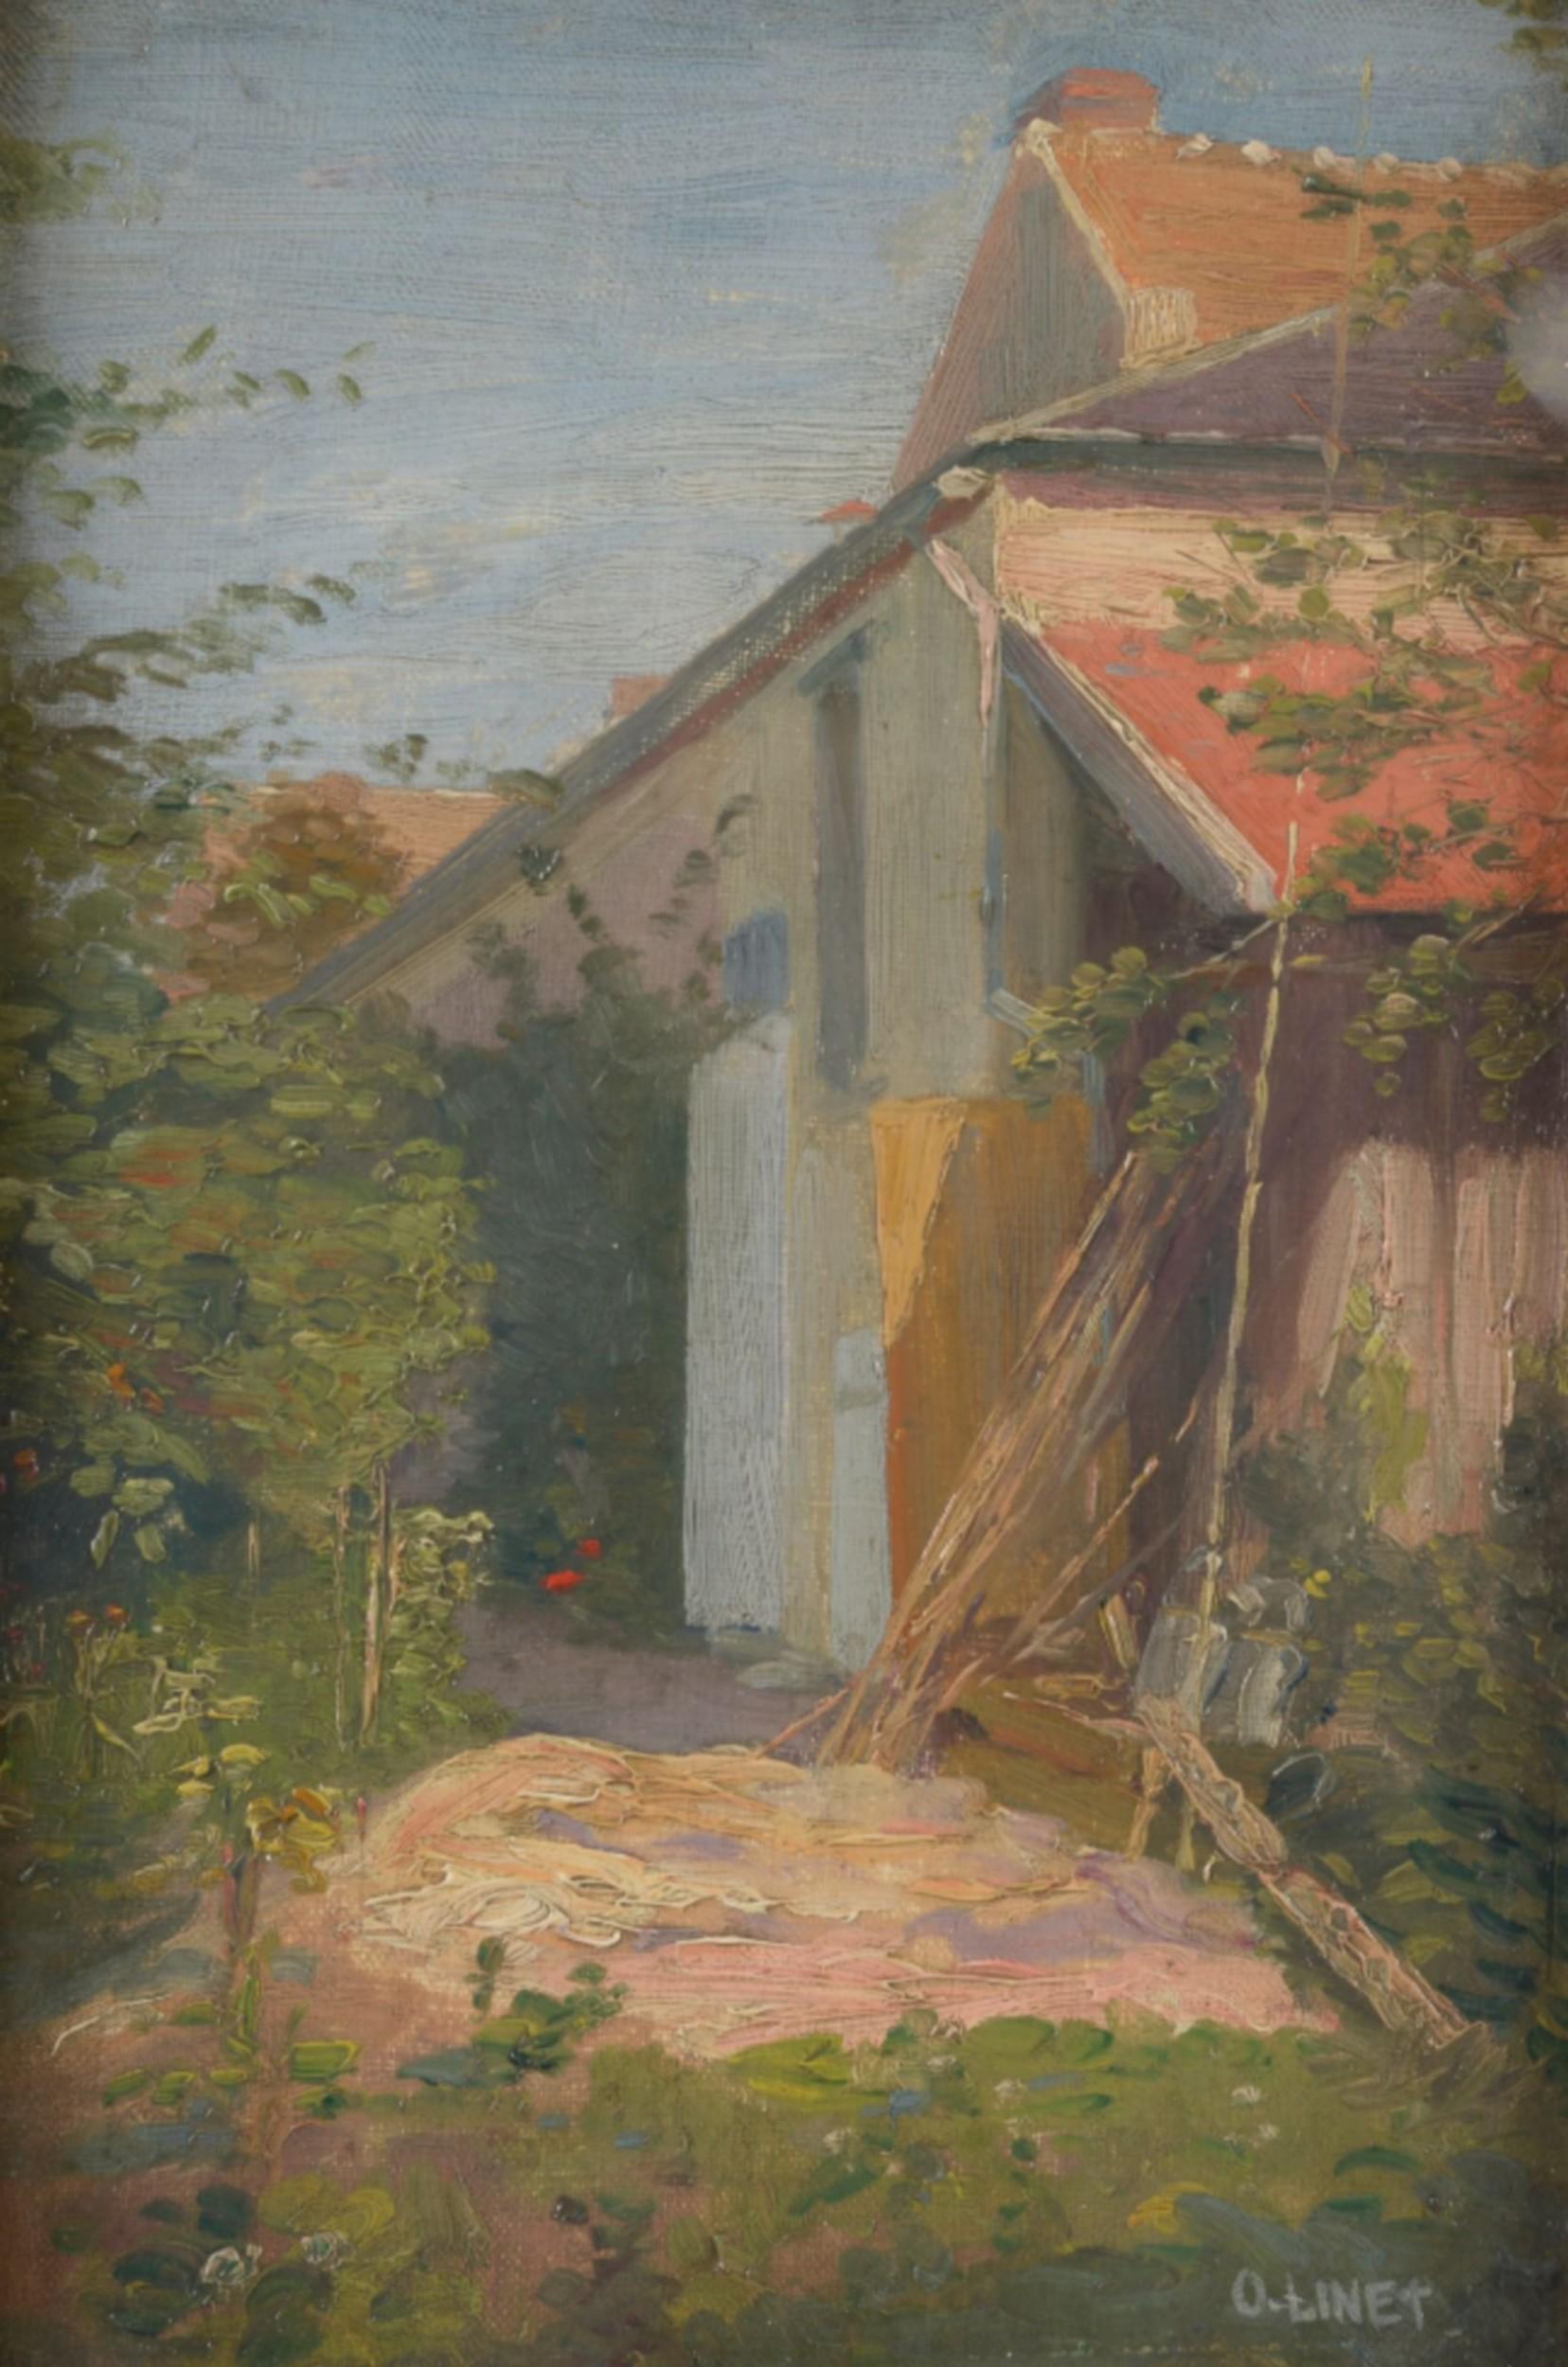 Octave Linet (1870-1962) 
A Garden, 1901, 
signed lower right
titled and dated on a label on the back of the stretcher "La remise au fond du jardin, Nesles la Vallée sept 1901"
oil on canvas 
32.5 x 21.5 cm
In good condition
Framed under glass 42 x